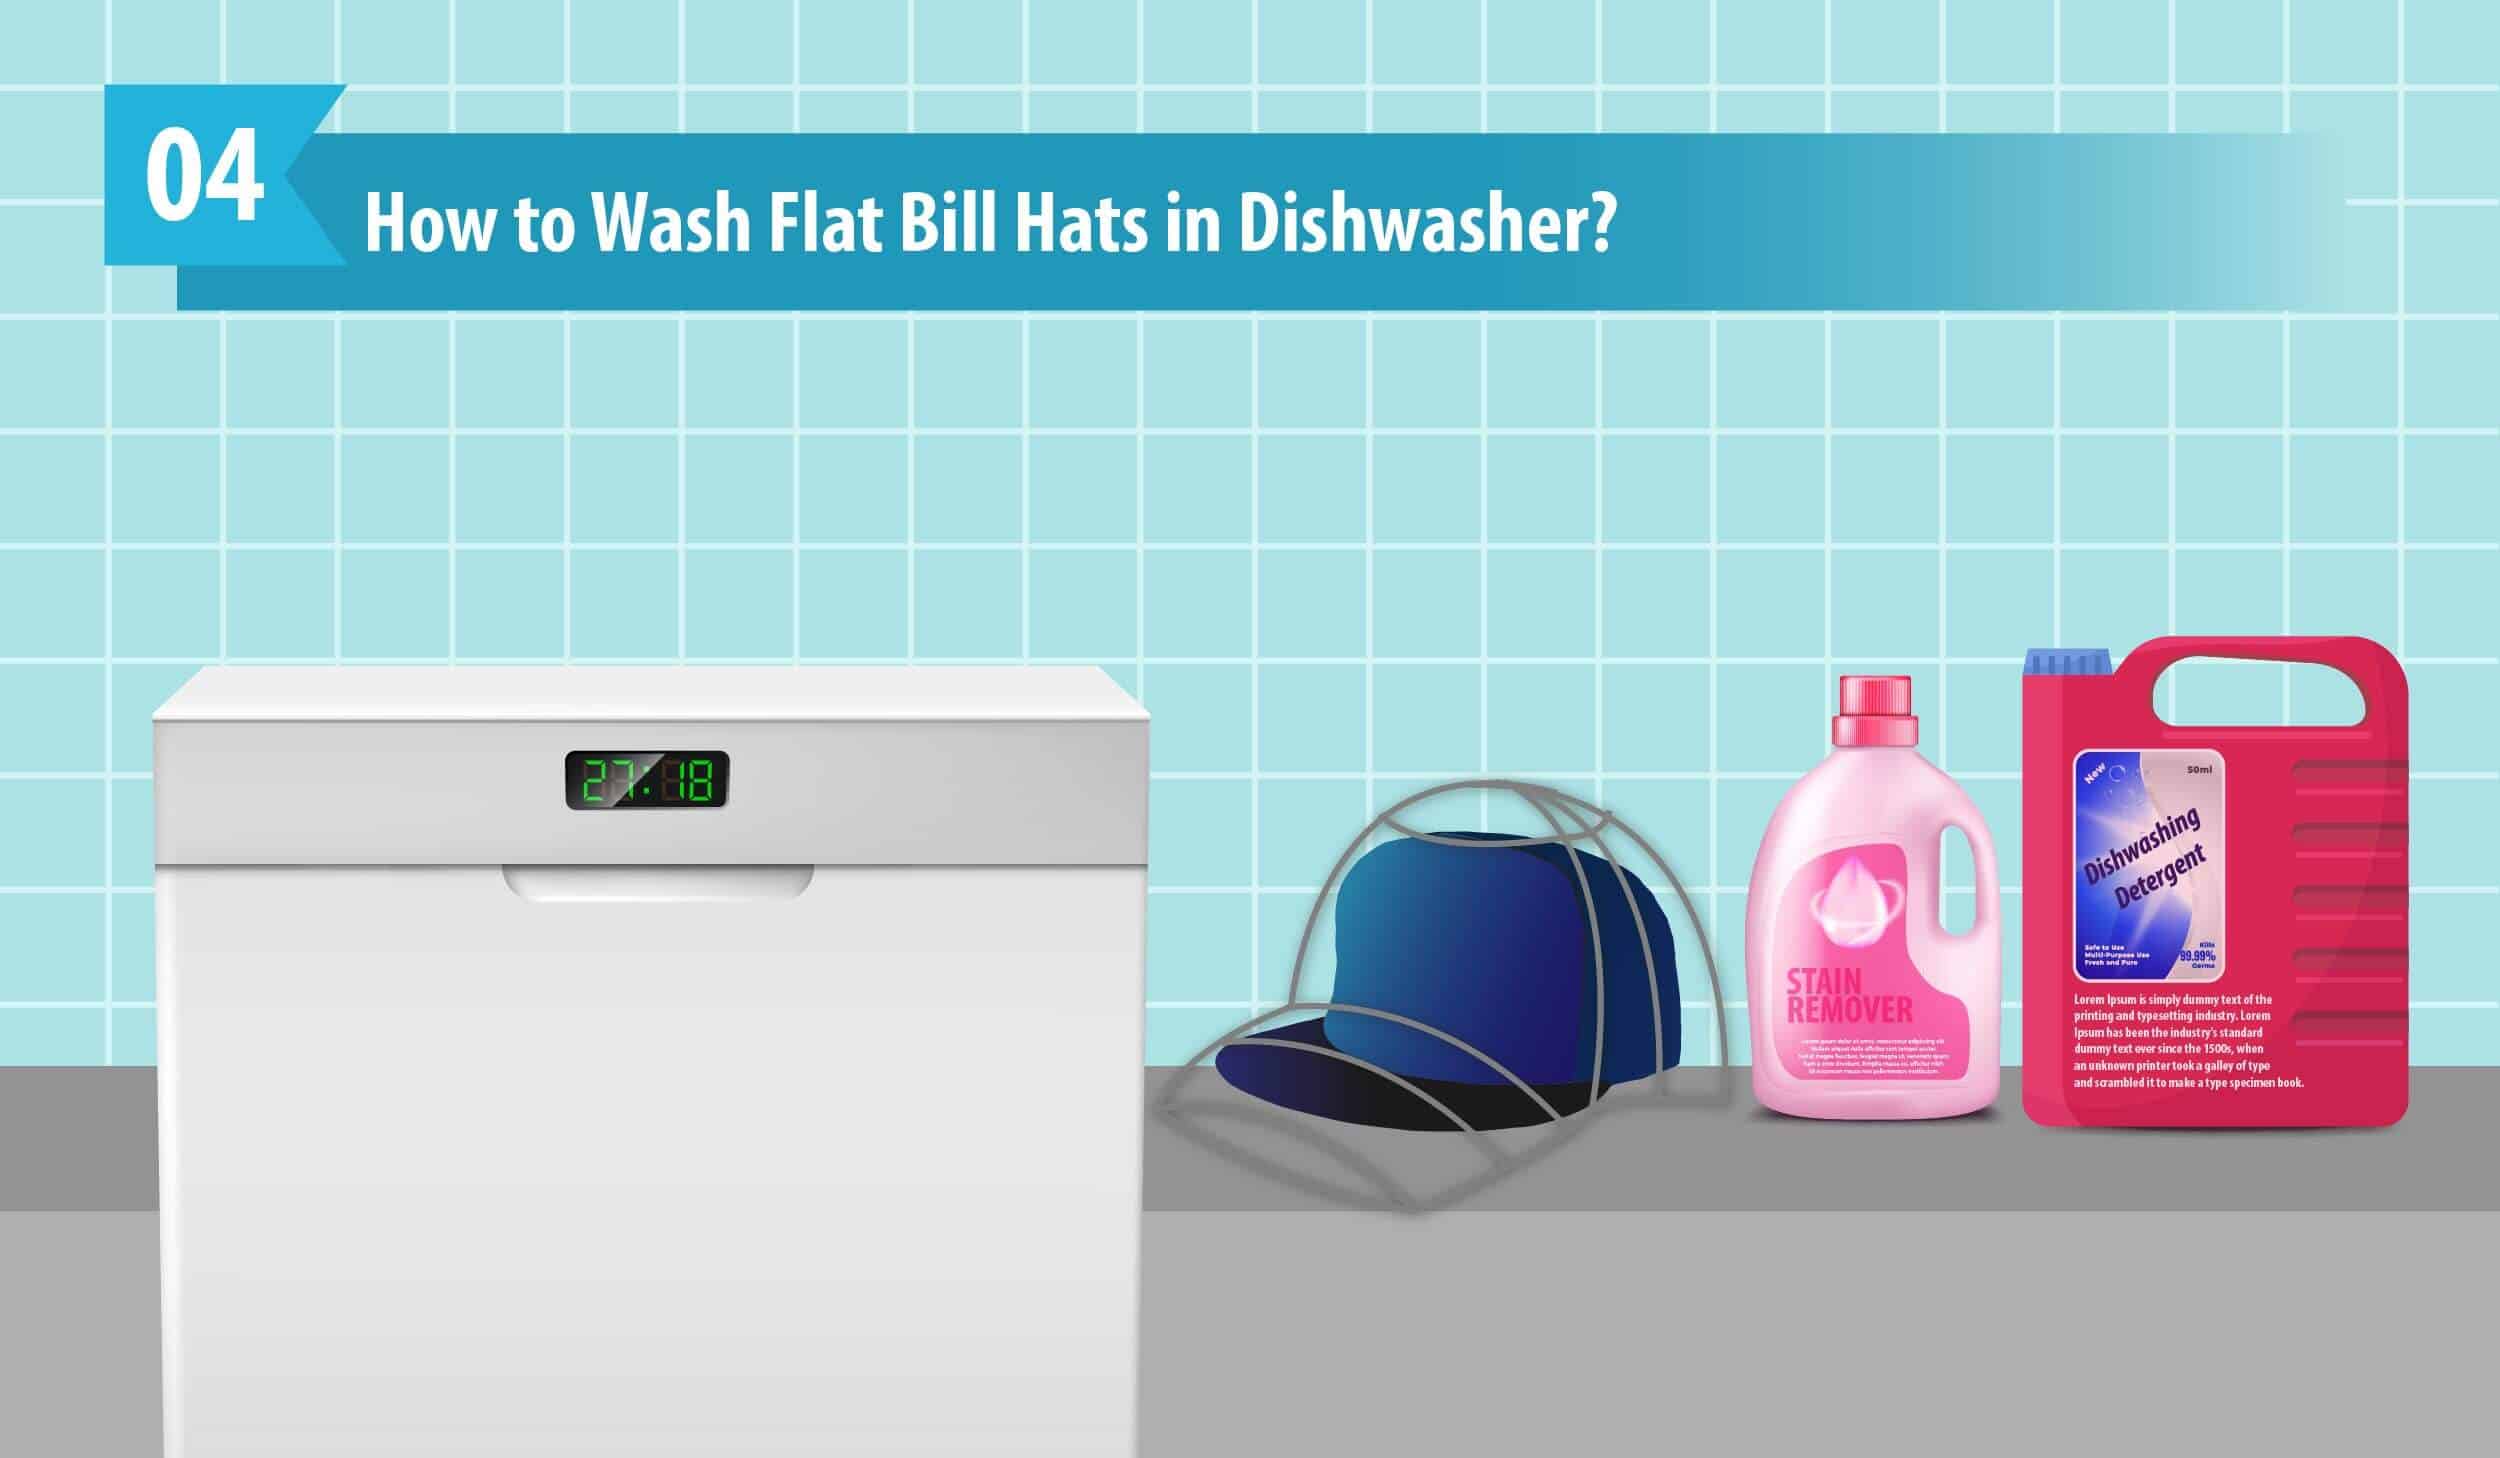 How to Wash Flat Bill Hats in Dishwasher